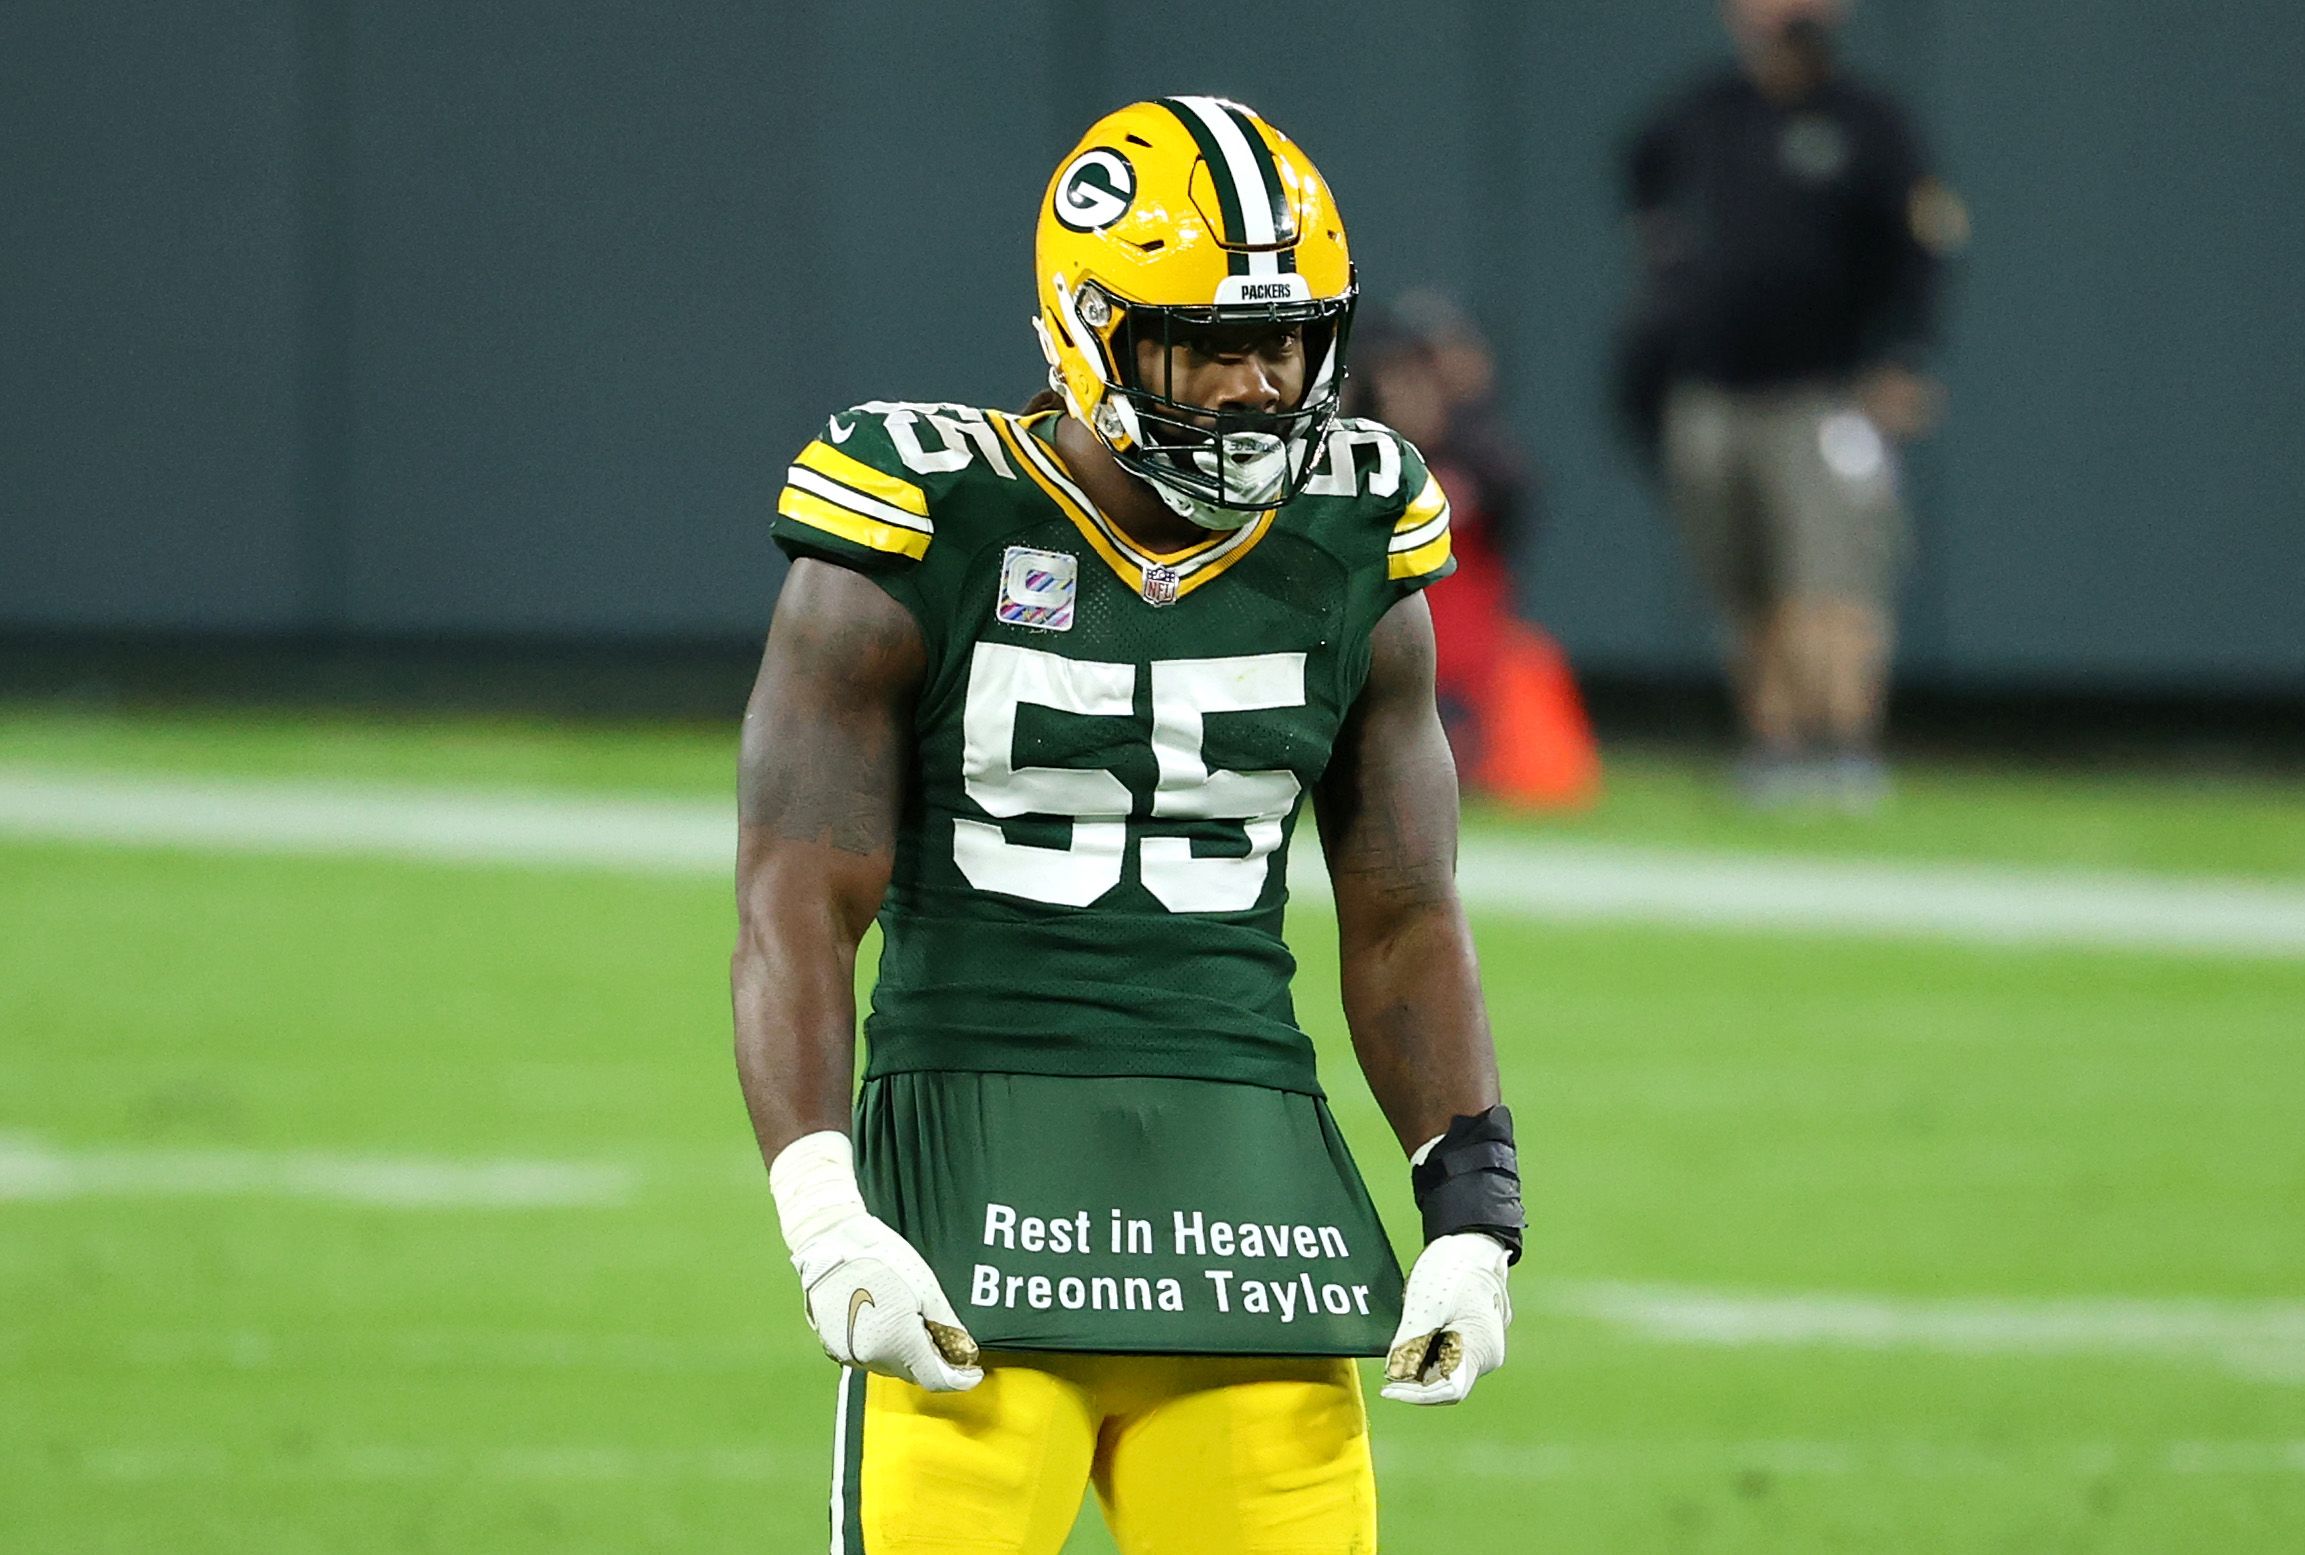 Za'Darius Smith reveals 'Rest in Heaven Breonna Taylor' message after  getting a sack for the Green Bay Packers